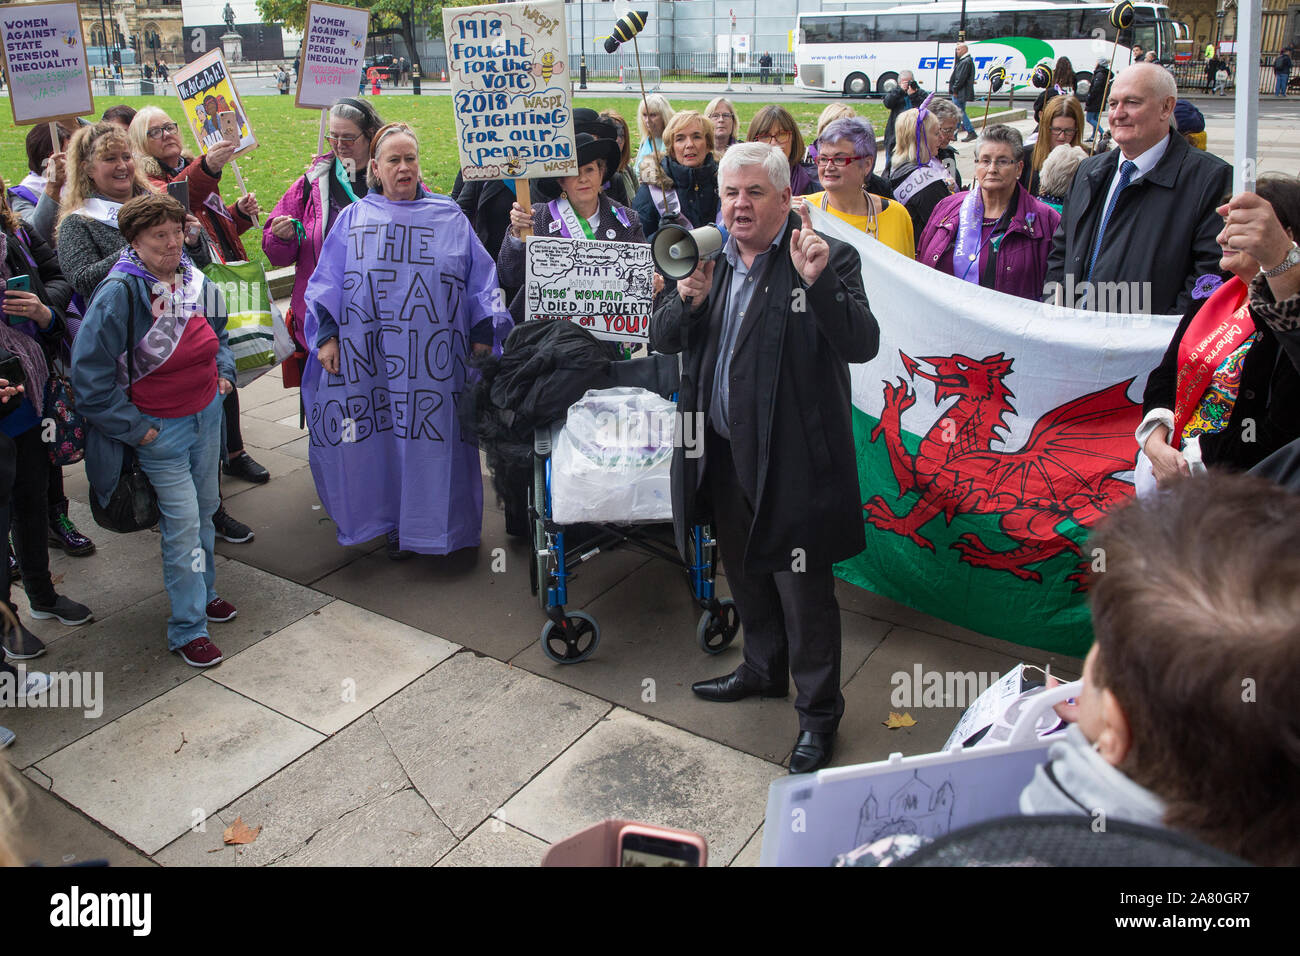 London, UK. 5 November, 2019. Hugh Gaffney, Scottish Labour MP for Coatbridge, Chryston and Bellshill, addresses campaigners from WASPI (Women Against State Pension Inequality) protesting in Parliament Square to call for fair transitional pension arrangements for women born in the 1950s affected by the changes to the State Pension Age (SPA), including a 'bridging' pension to provide an income from age 60 until State Pension Age and recompense for losses incurred by women who have already reached their SPA. Credit: Mark Kerrison/Alamy Live News Stock Photo